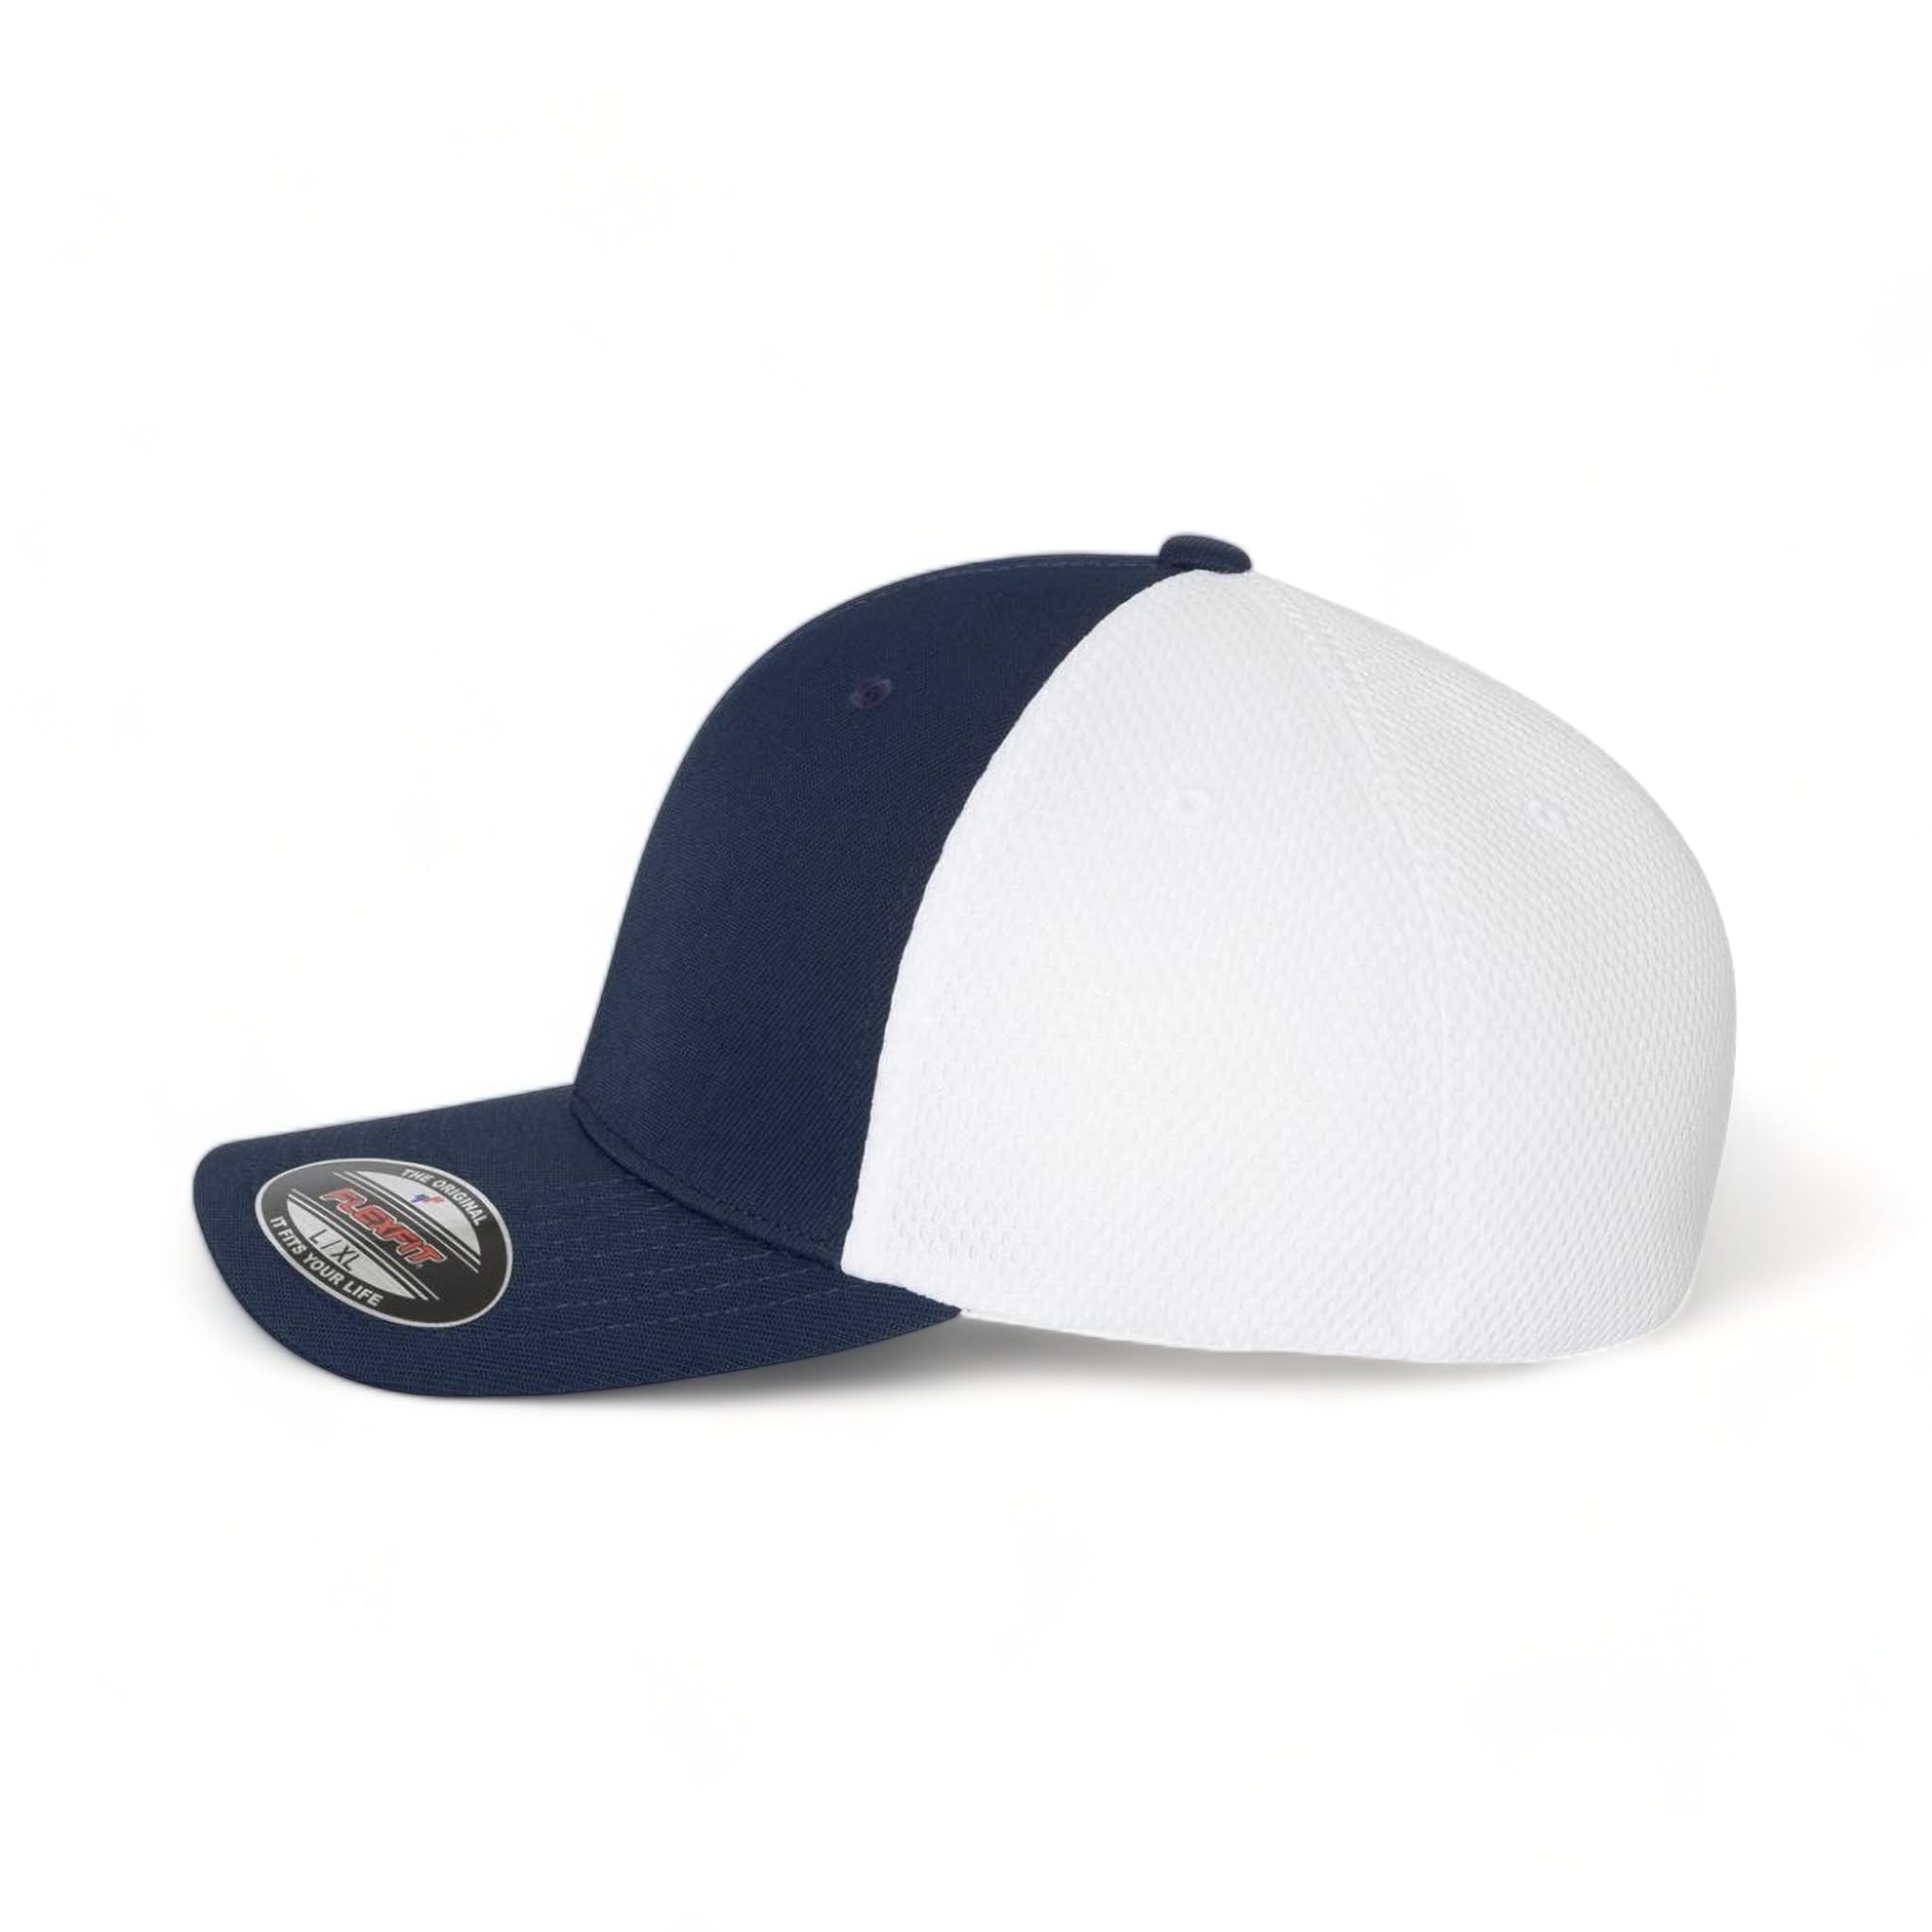 Side view of Flexfit 6533 custom hat in navy and white